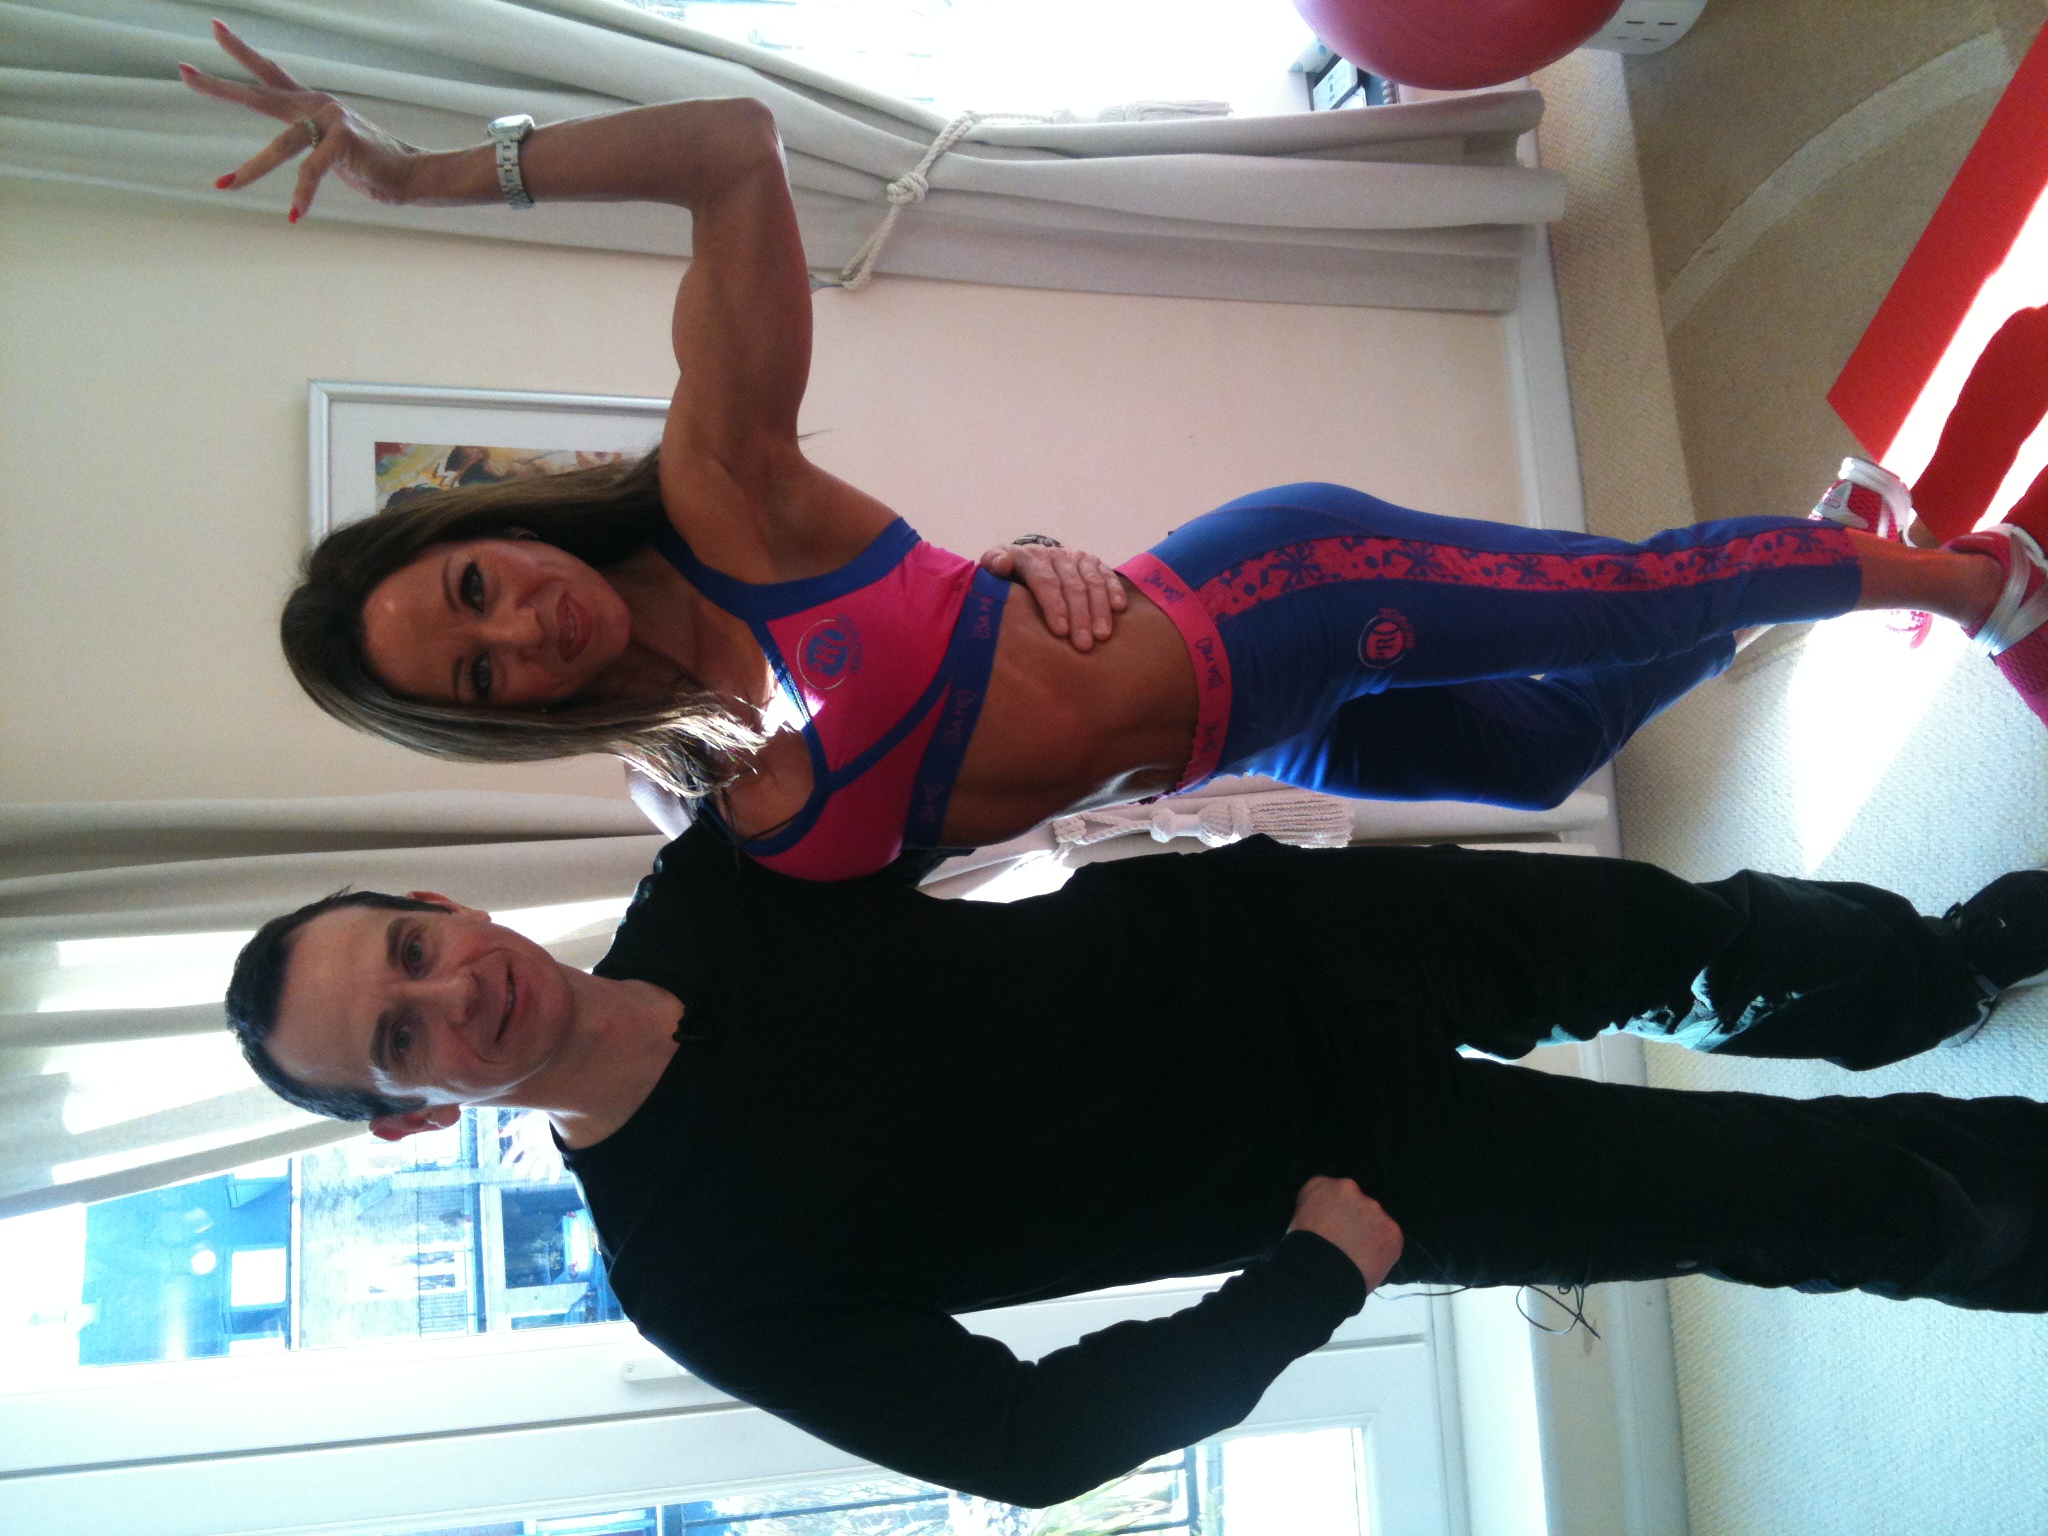 An image of Personal Trainer Tim Sharp Stunning Rachel filming 2012 goes here.